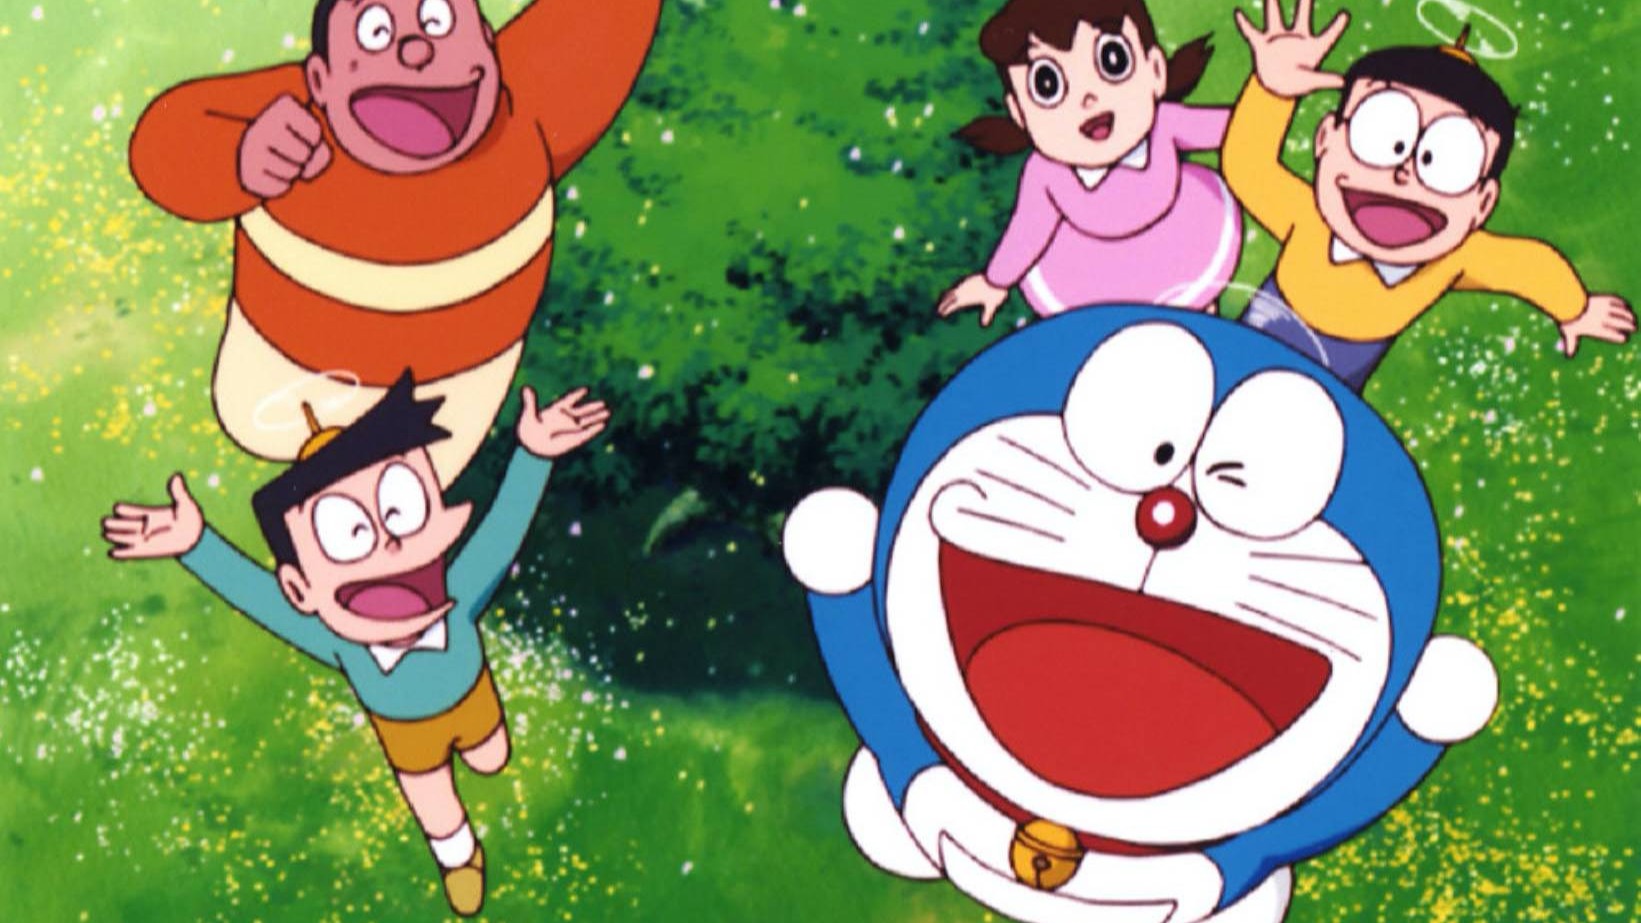 Doraemon (Japanese: ????? [do?aemo?]) is a Japanese manga series written and illustrated by Fujiko Fujio (the pen n...